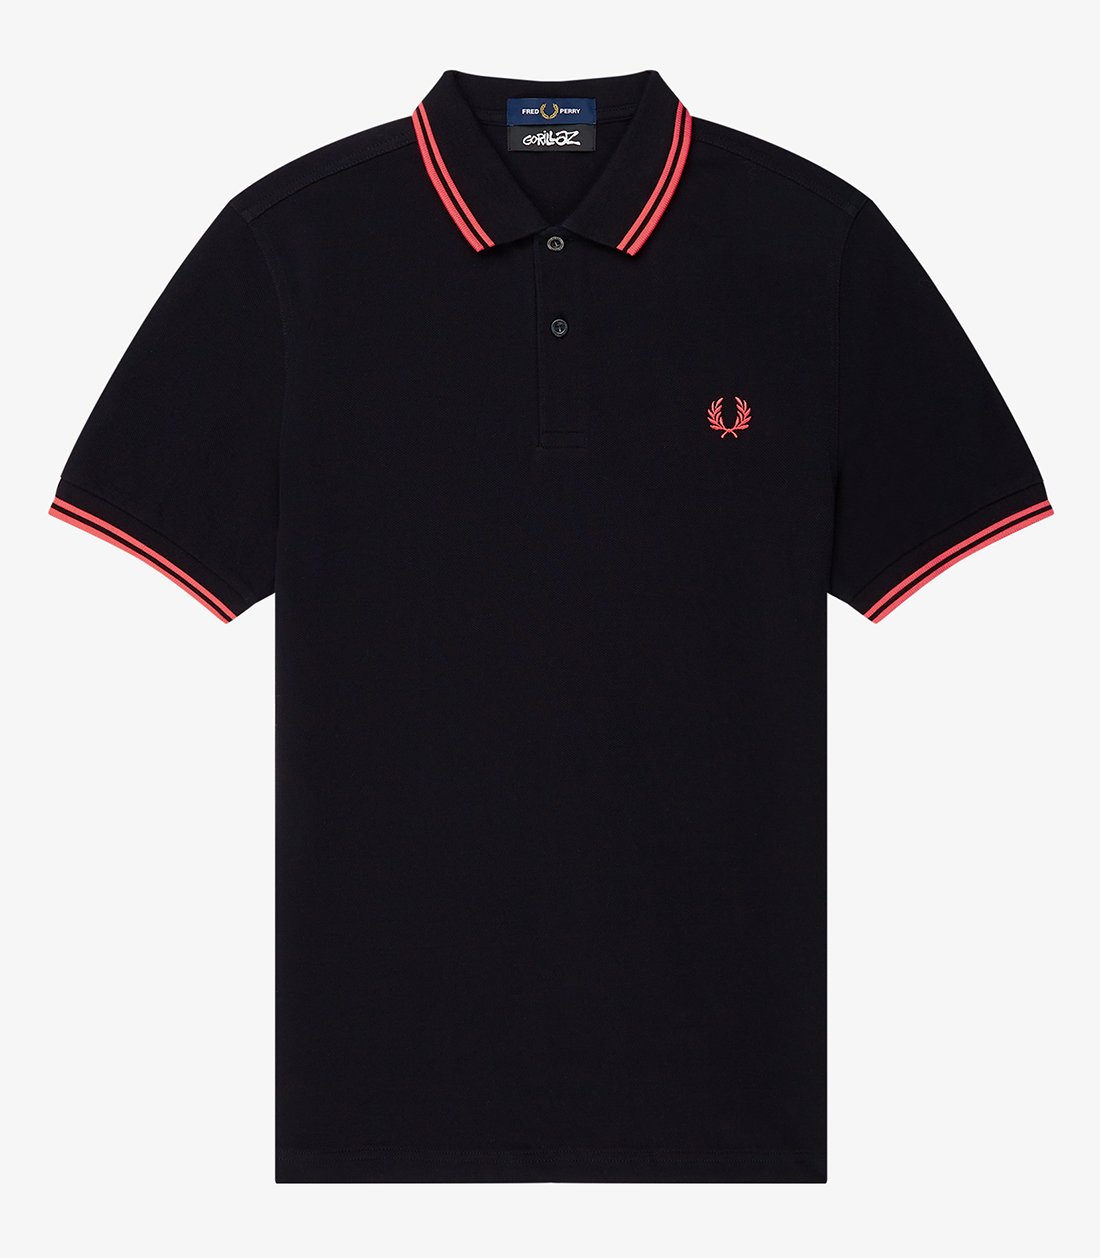 Fred Perry x Gorillaz Collection